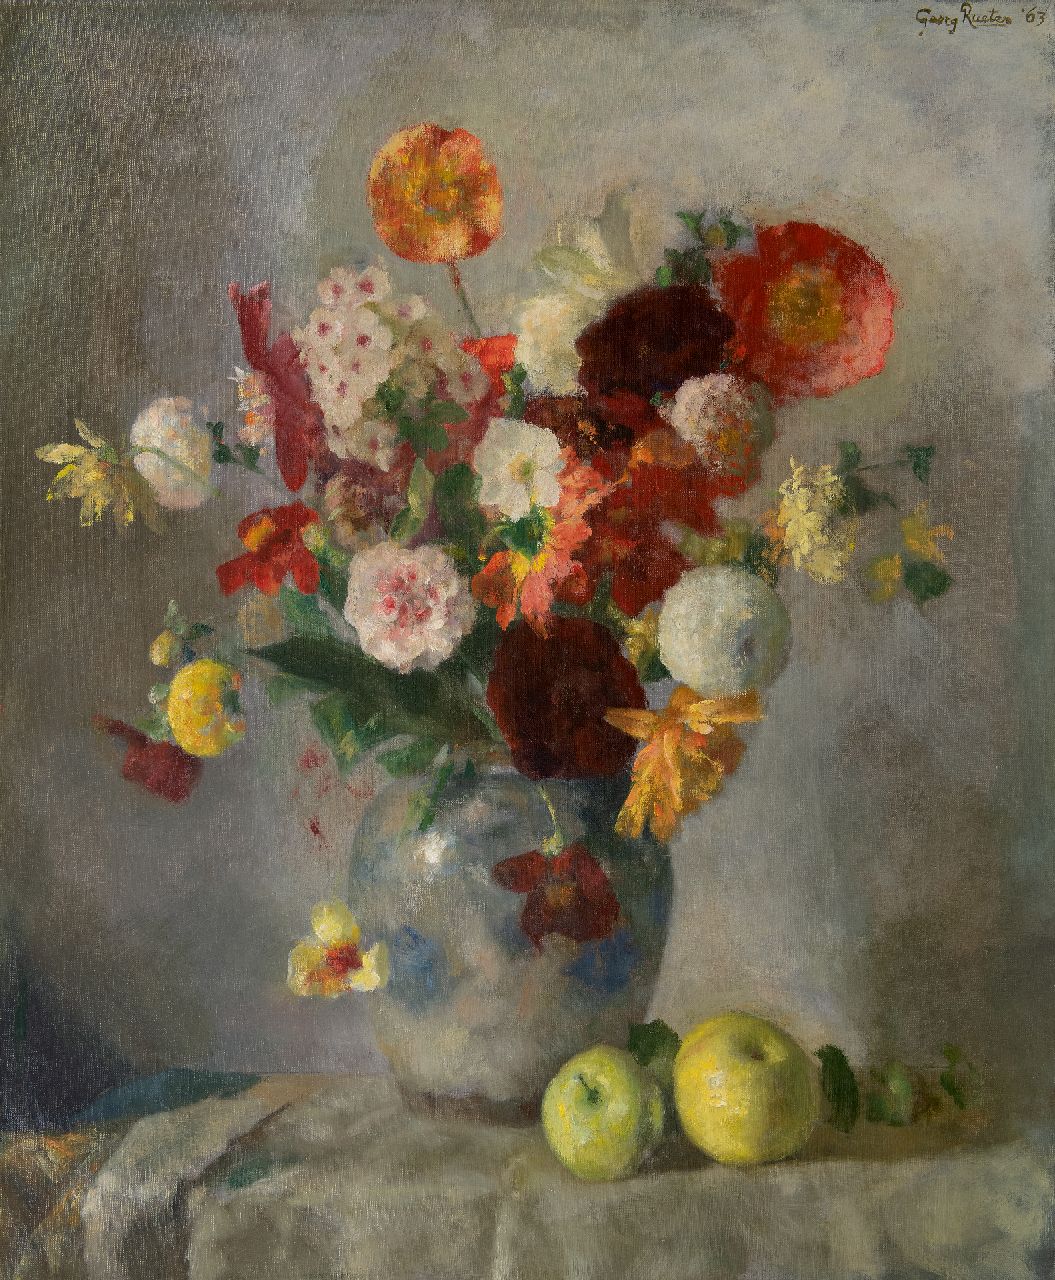 Rueter W.C.G.  | Wilhelm Christian 'Georg' Rueter | Paintings offered for sale | Flower still life, oil on canvas 74.2 x 61.3 cm, signed u.r. and dated '63